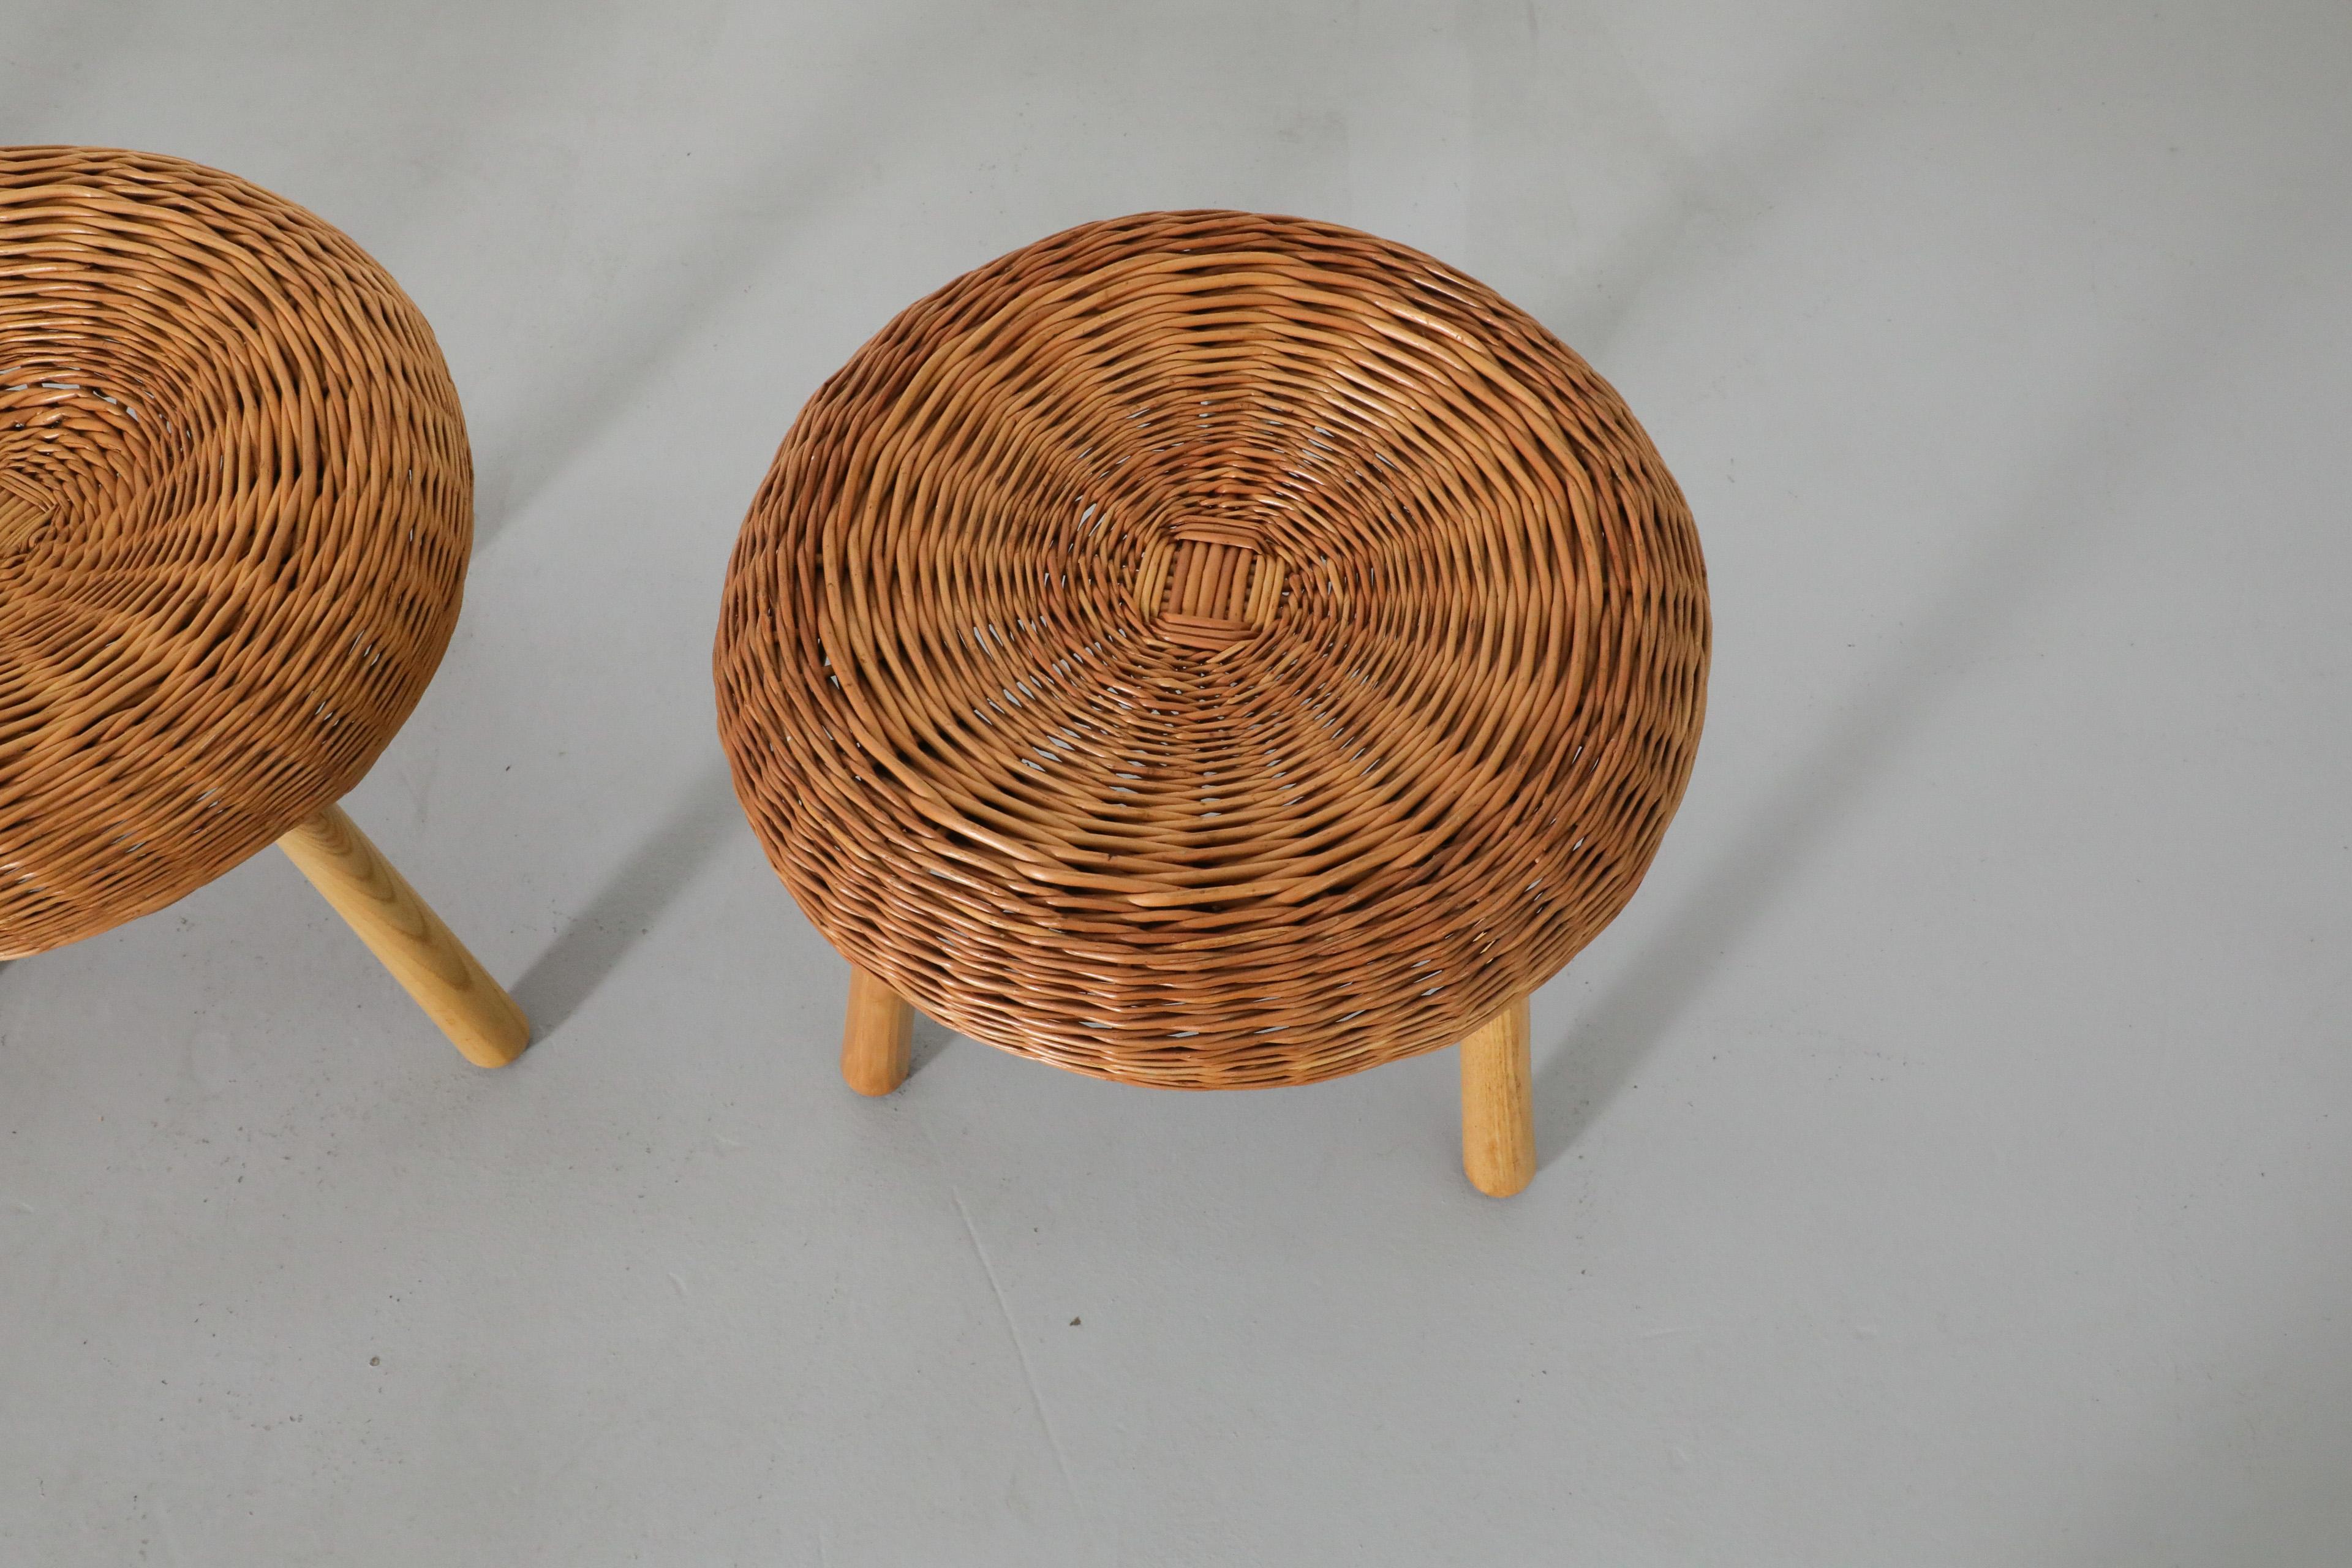 Tony Paul Attributed Woven Rattan Tripod Stools with Tapered Solid Wood Legs For Sale 3